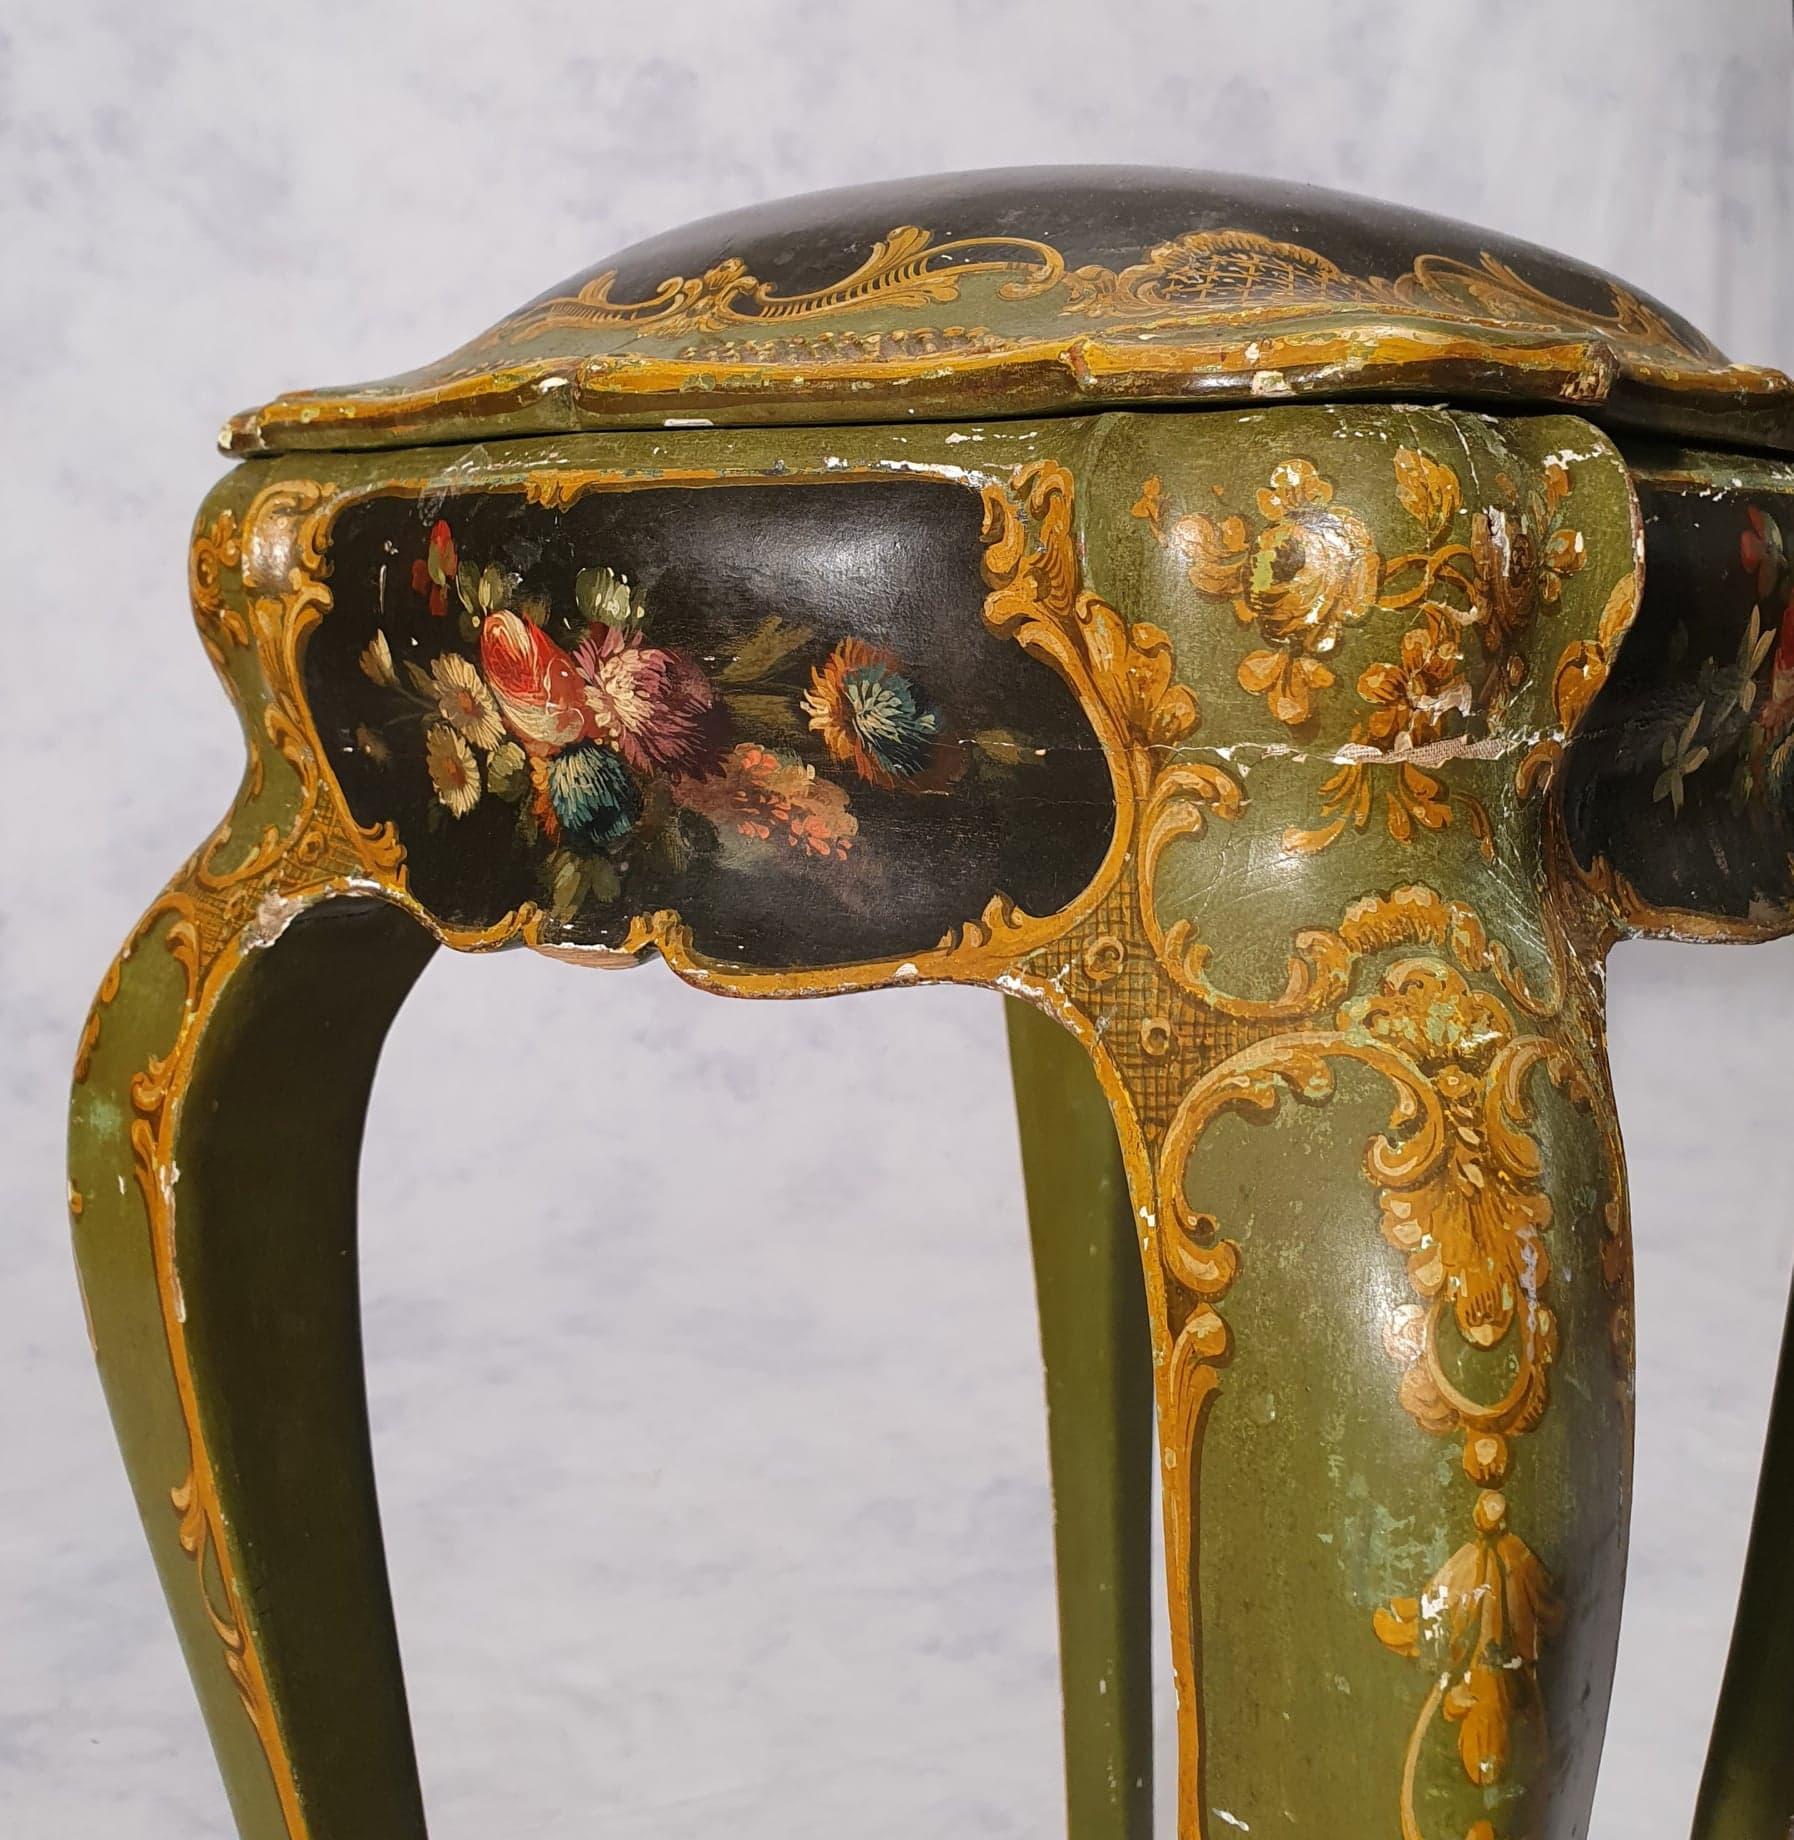 Very original small Venetian table-box in Louis XV style. This small 19th century piece of furniture is typical of the typical Venetian work of that time. The delicacy of the cabinetry and the finesse of the painting give this room a very special